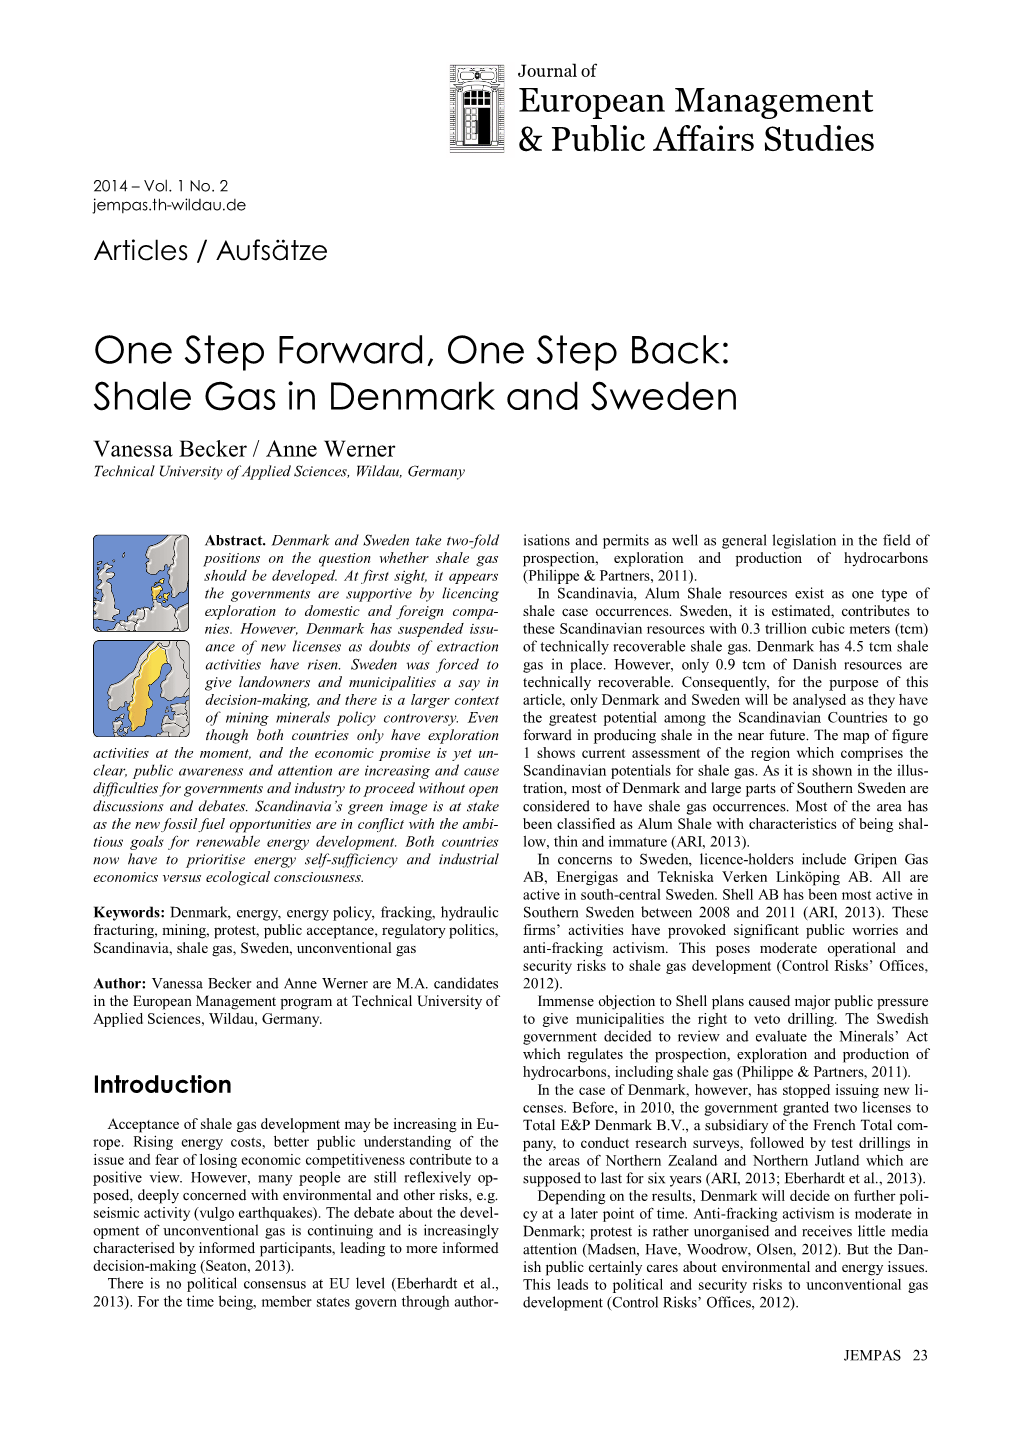 Shale Gas in Denmark and Sweden Vanessa Becker / Anne Werner Technical University of Applied Sciences, Wildau, Germany